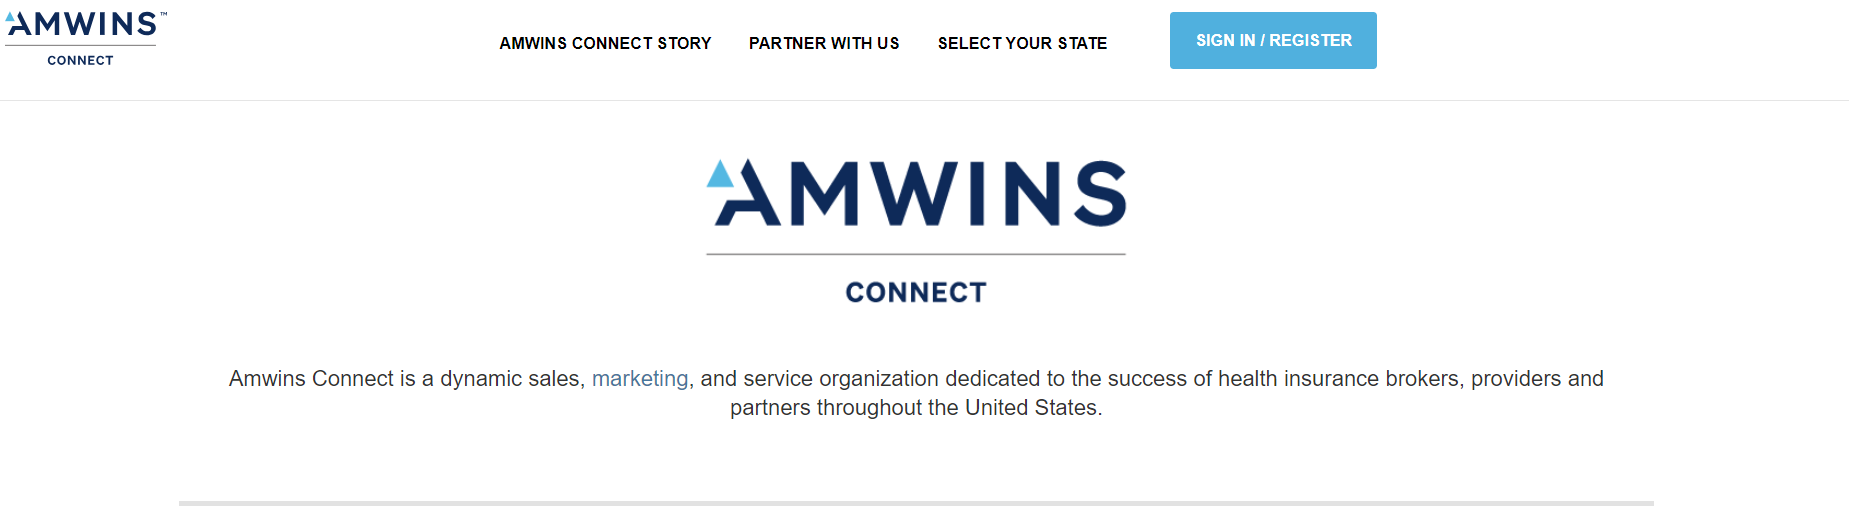 AmWINS Connect